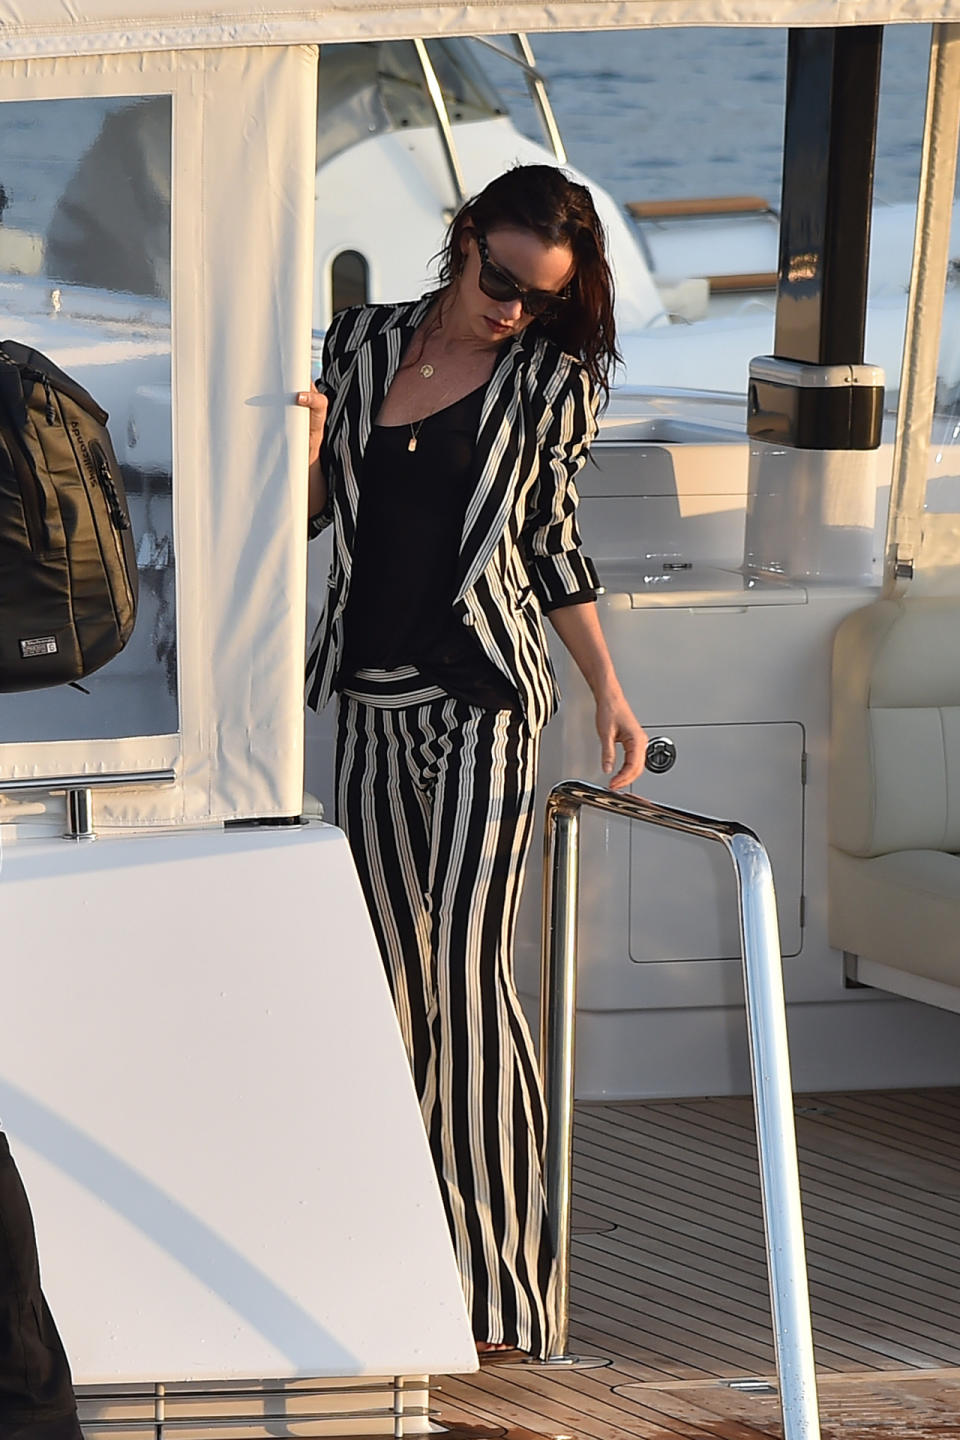 No, that’s not Michael Keaton in his iconic striped suit from “Beetlejuice”! It’s Juliette Lewis aboard a yacht in Cannes! The 41-year-old actress pushed up her sleeves and wore a loosely fitted cotton tank top.